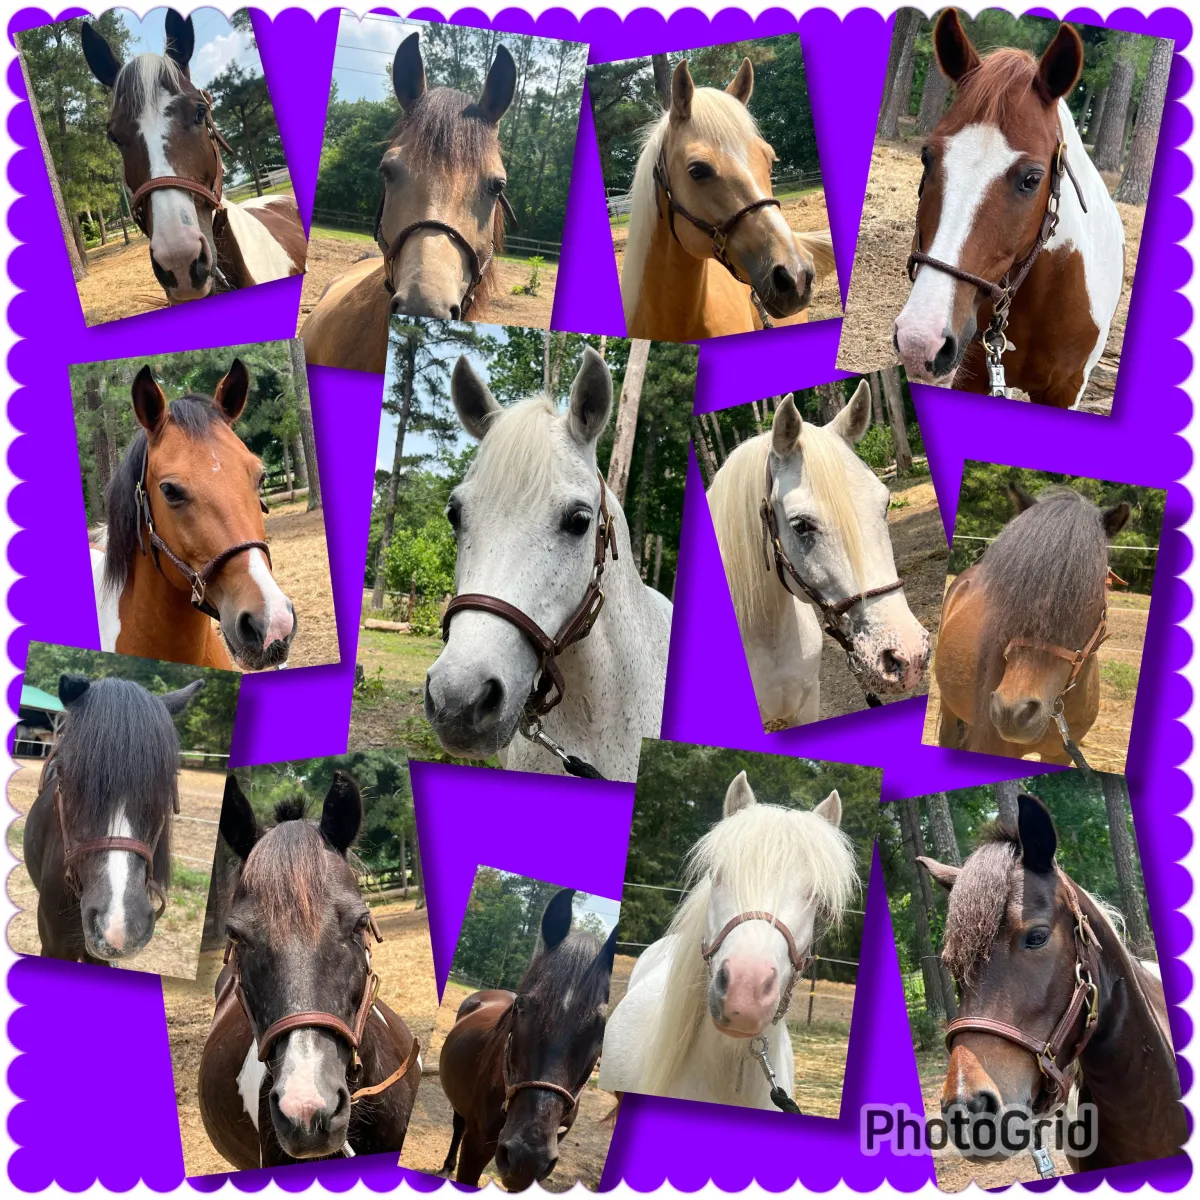 More of our horses here at camp